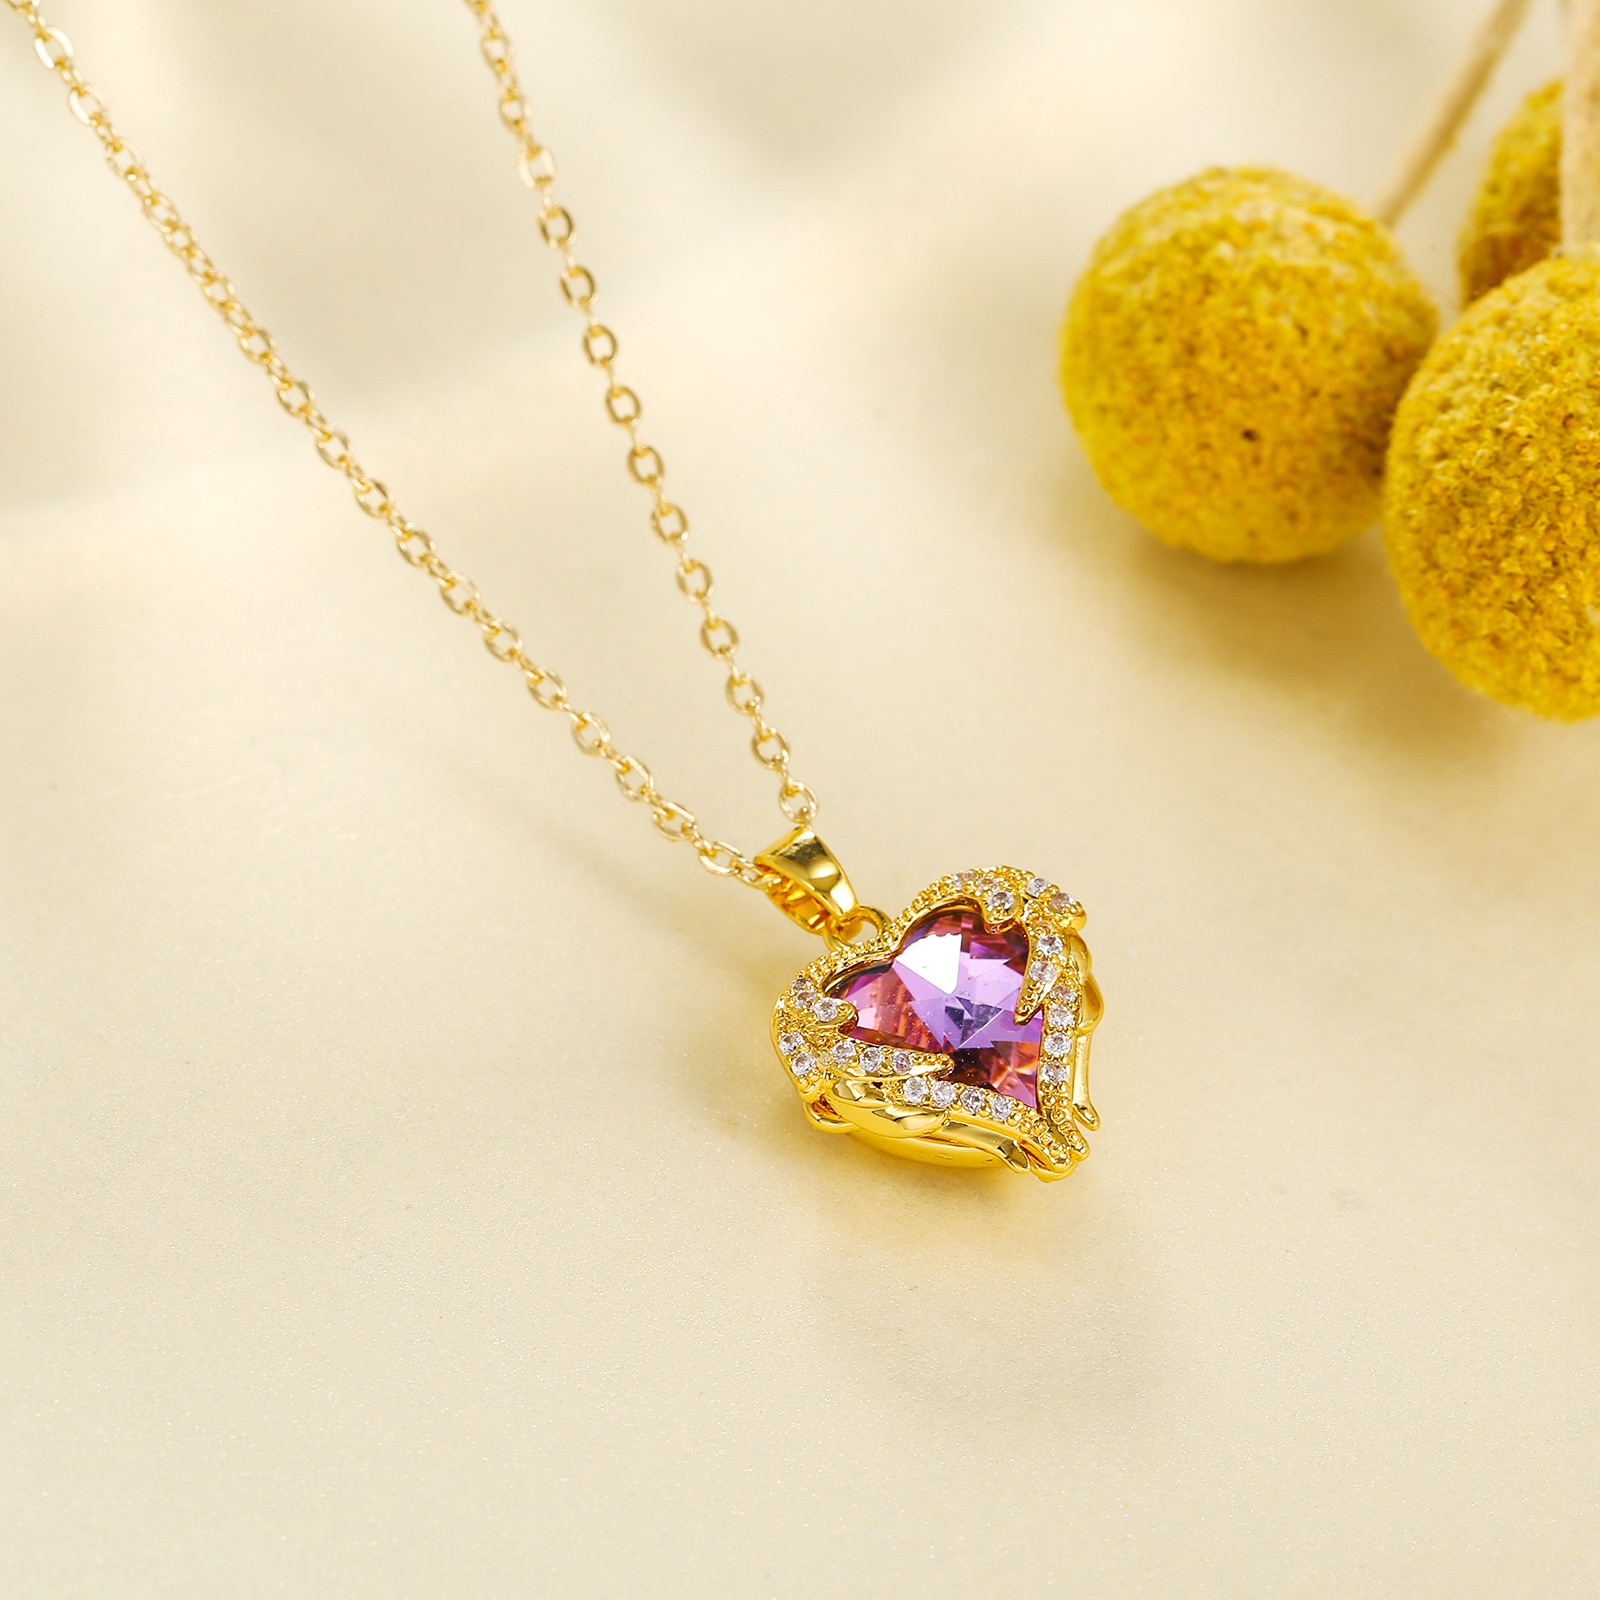 Fashionable New Ocean Heart Necklace Women's Love Color Crystal Diamond Pendant Real Gold Color Clavicle Chain Jewelry